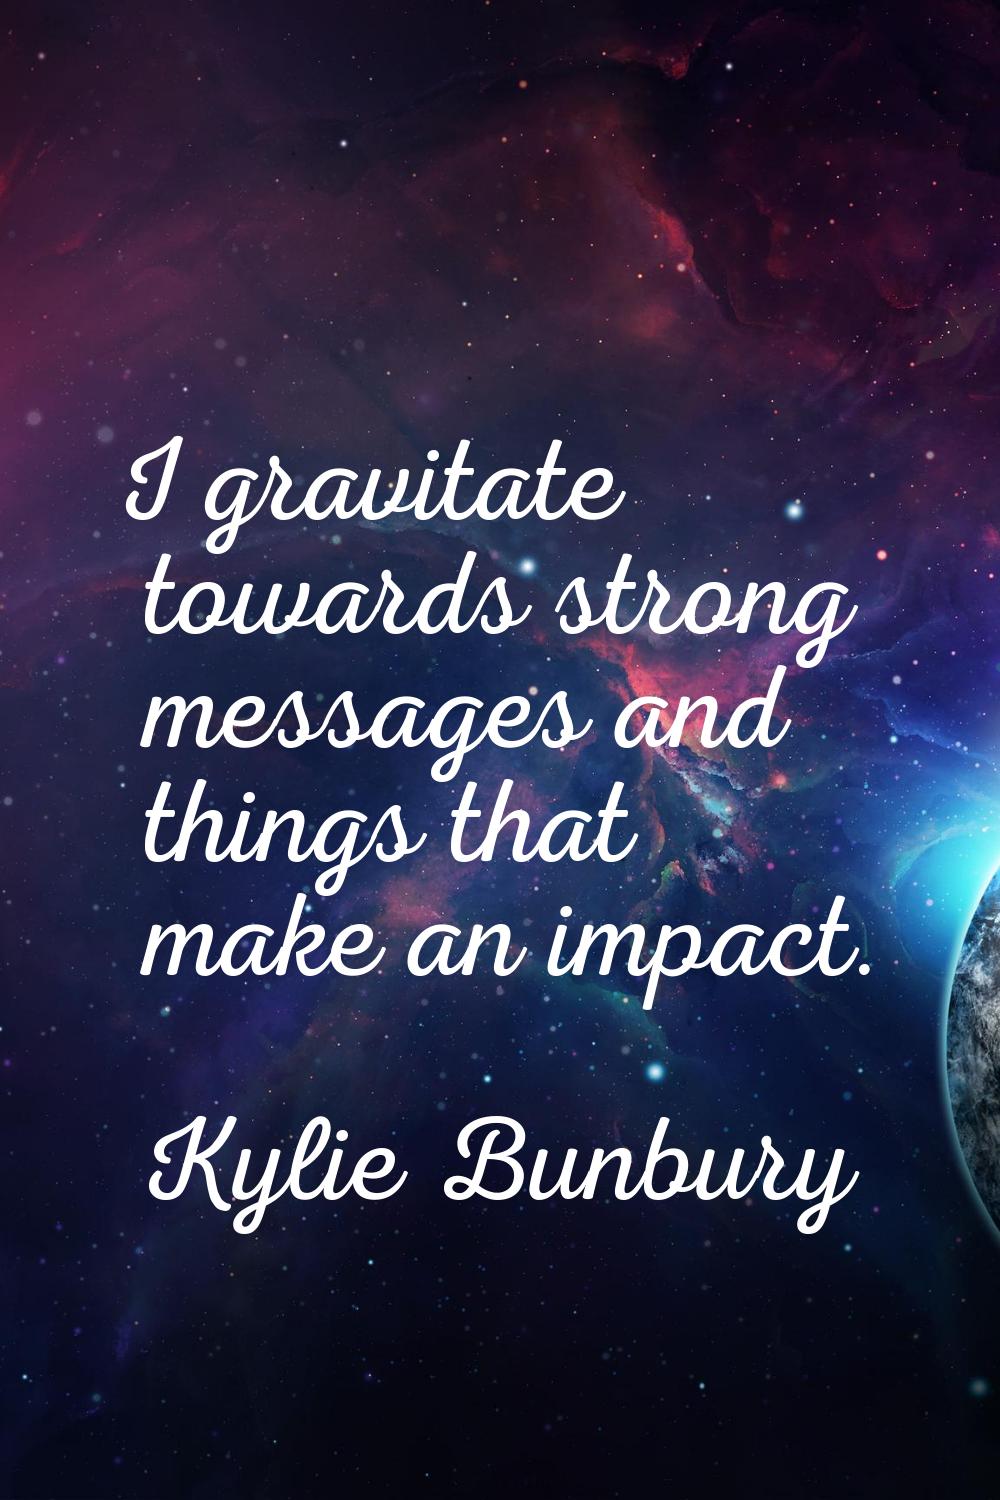 I gravitate towards strong messages and things that make an impact.